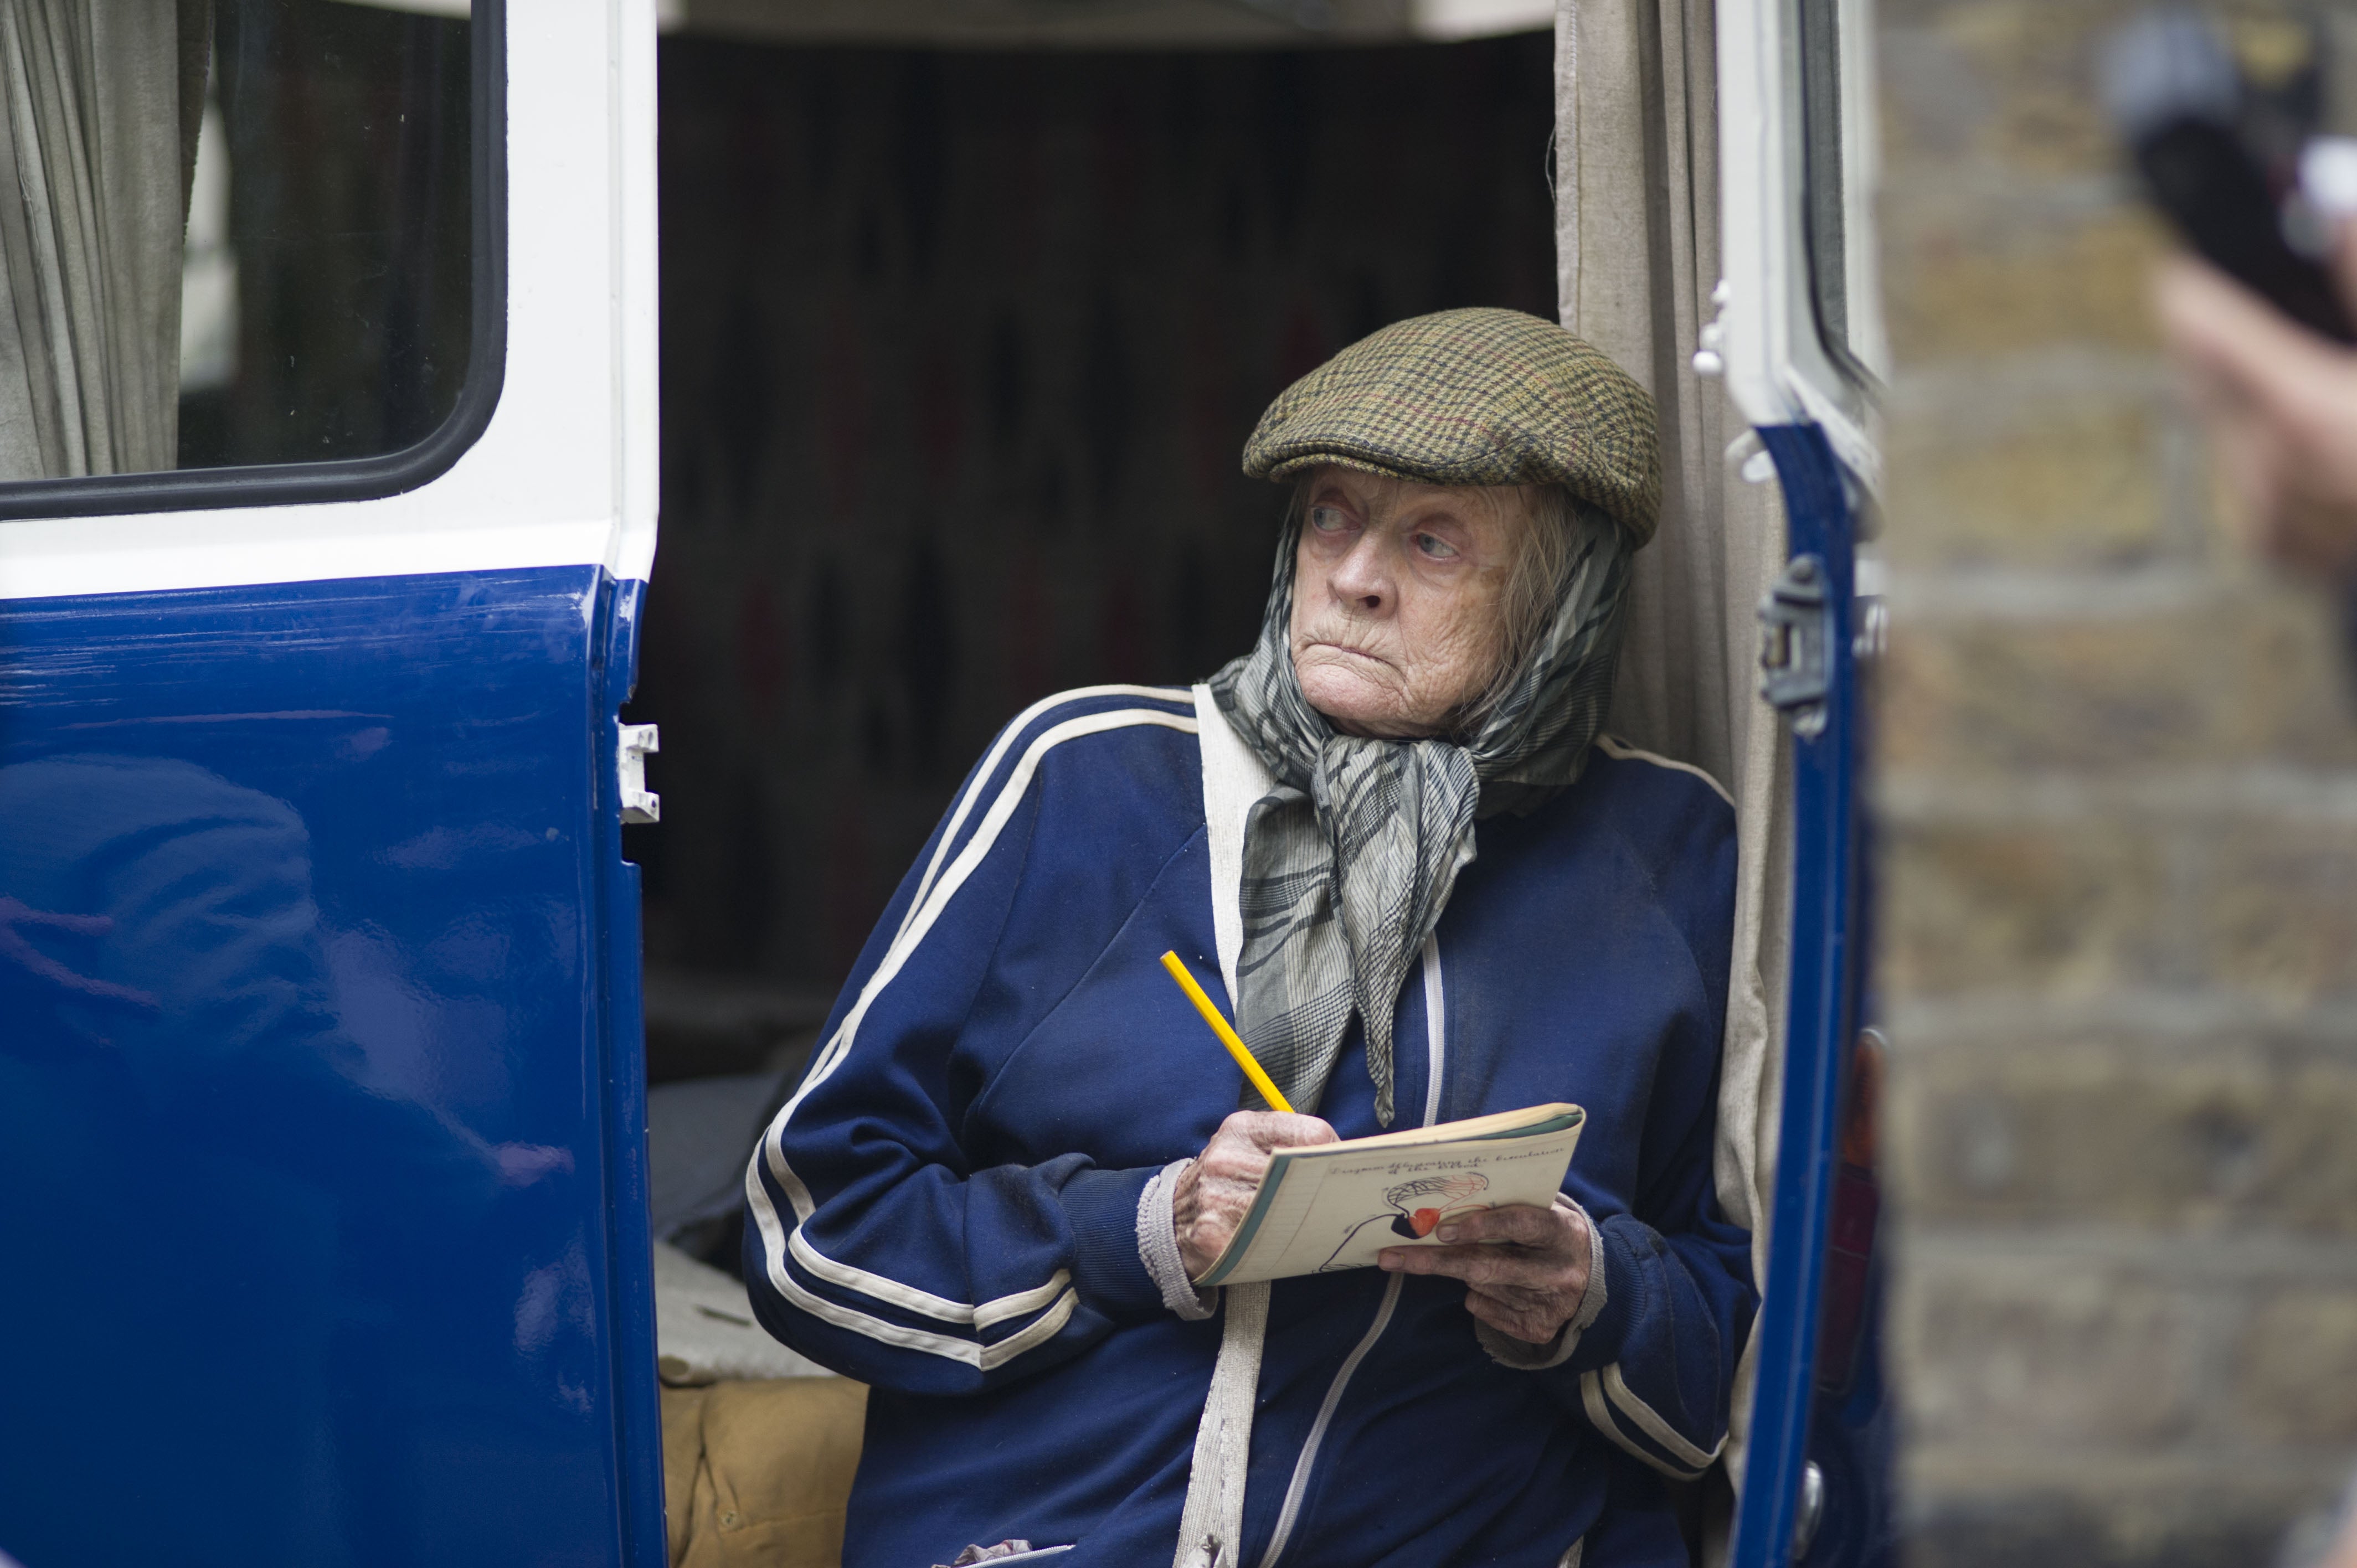 Maggie Smith in Nicholas Hytner’s film ‘The Lady in the Van’ (2015) is a mentally disturbed old bat who lives in poverty in a clapped-out Bedford van